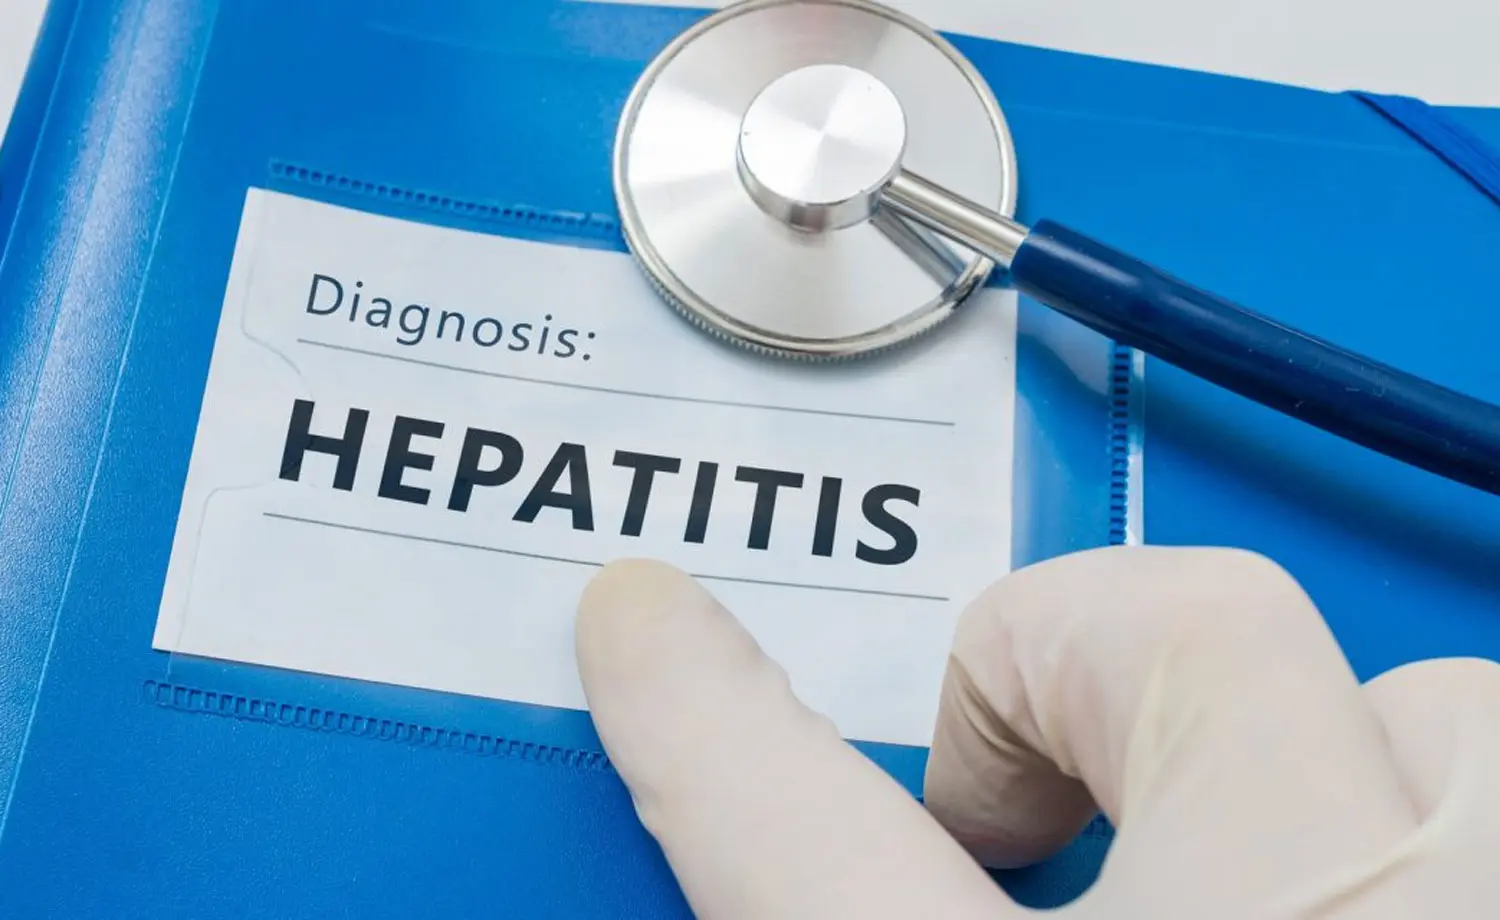 Hepatitis B: A Looming Threat - Expert Reveals Infection Rate 100 Times Higher than HIV